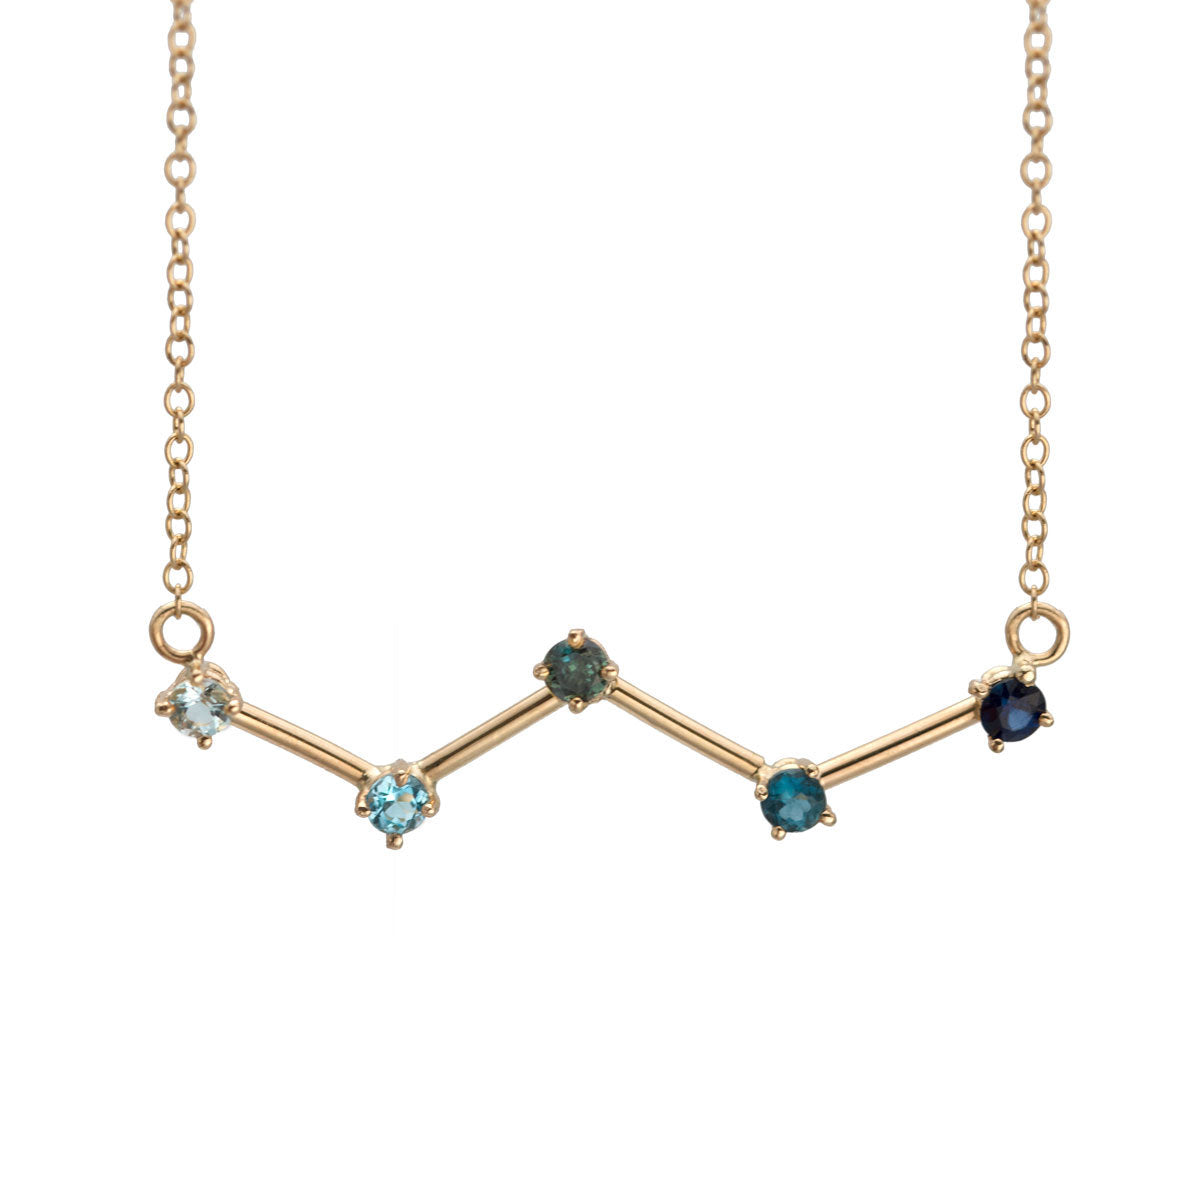 Cassiopeia constellation necklace in 14k gold